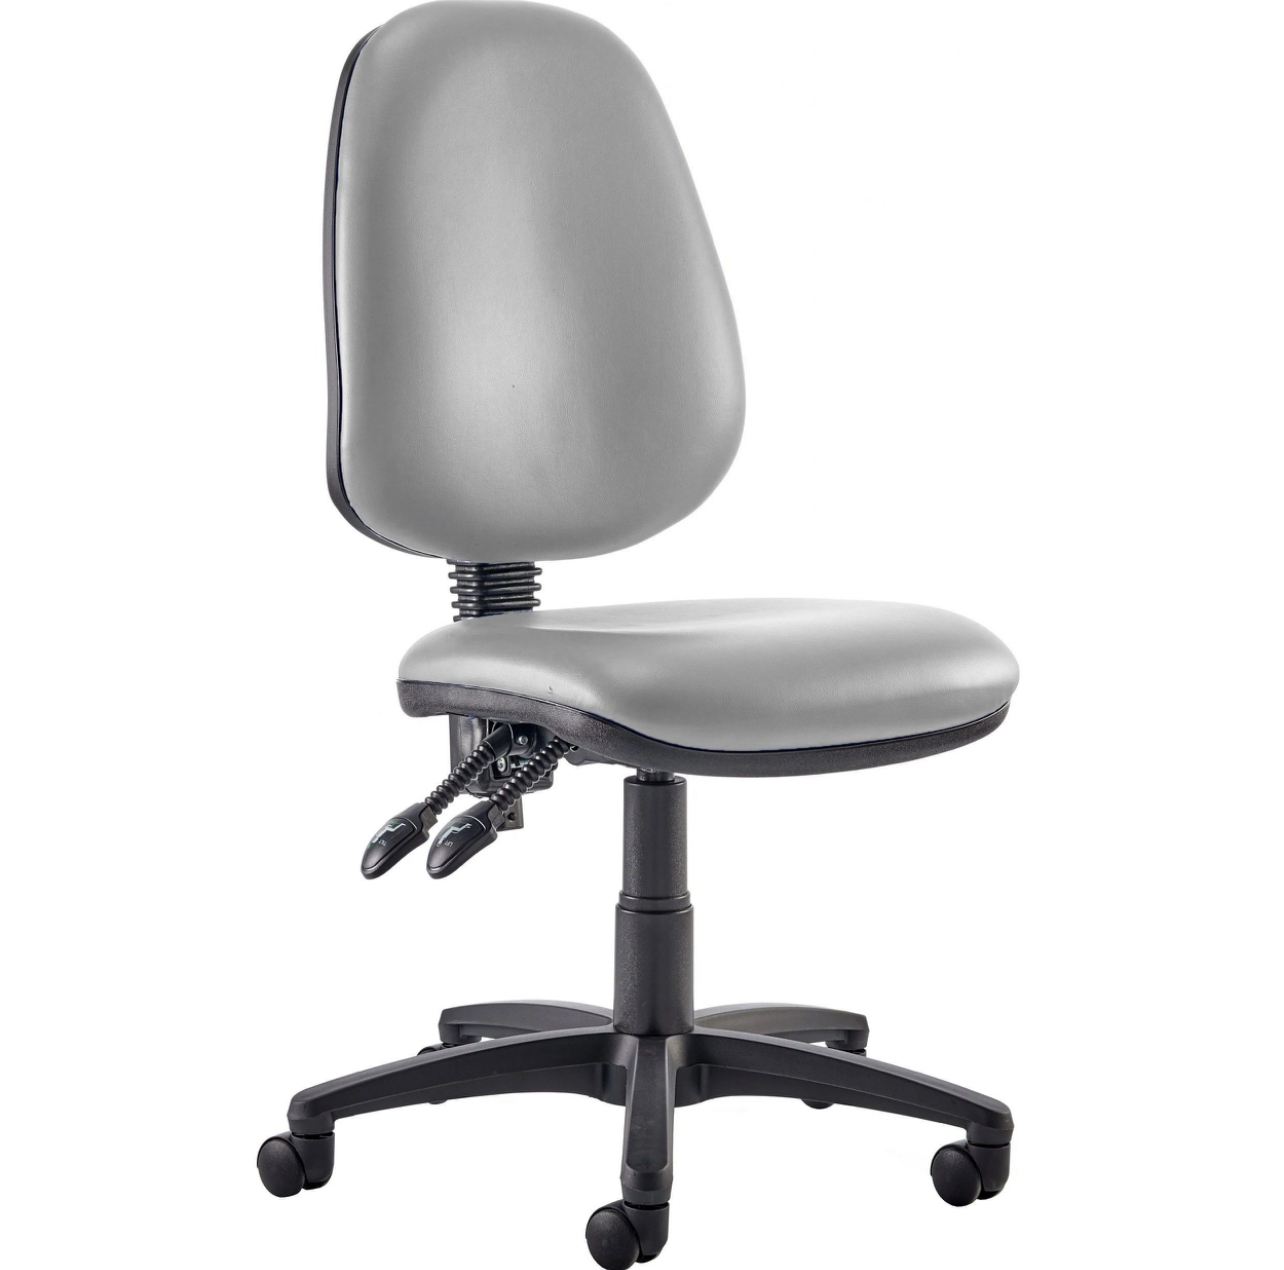 Kirby High back 2 lever vinyl operators chair mid grey colour